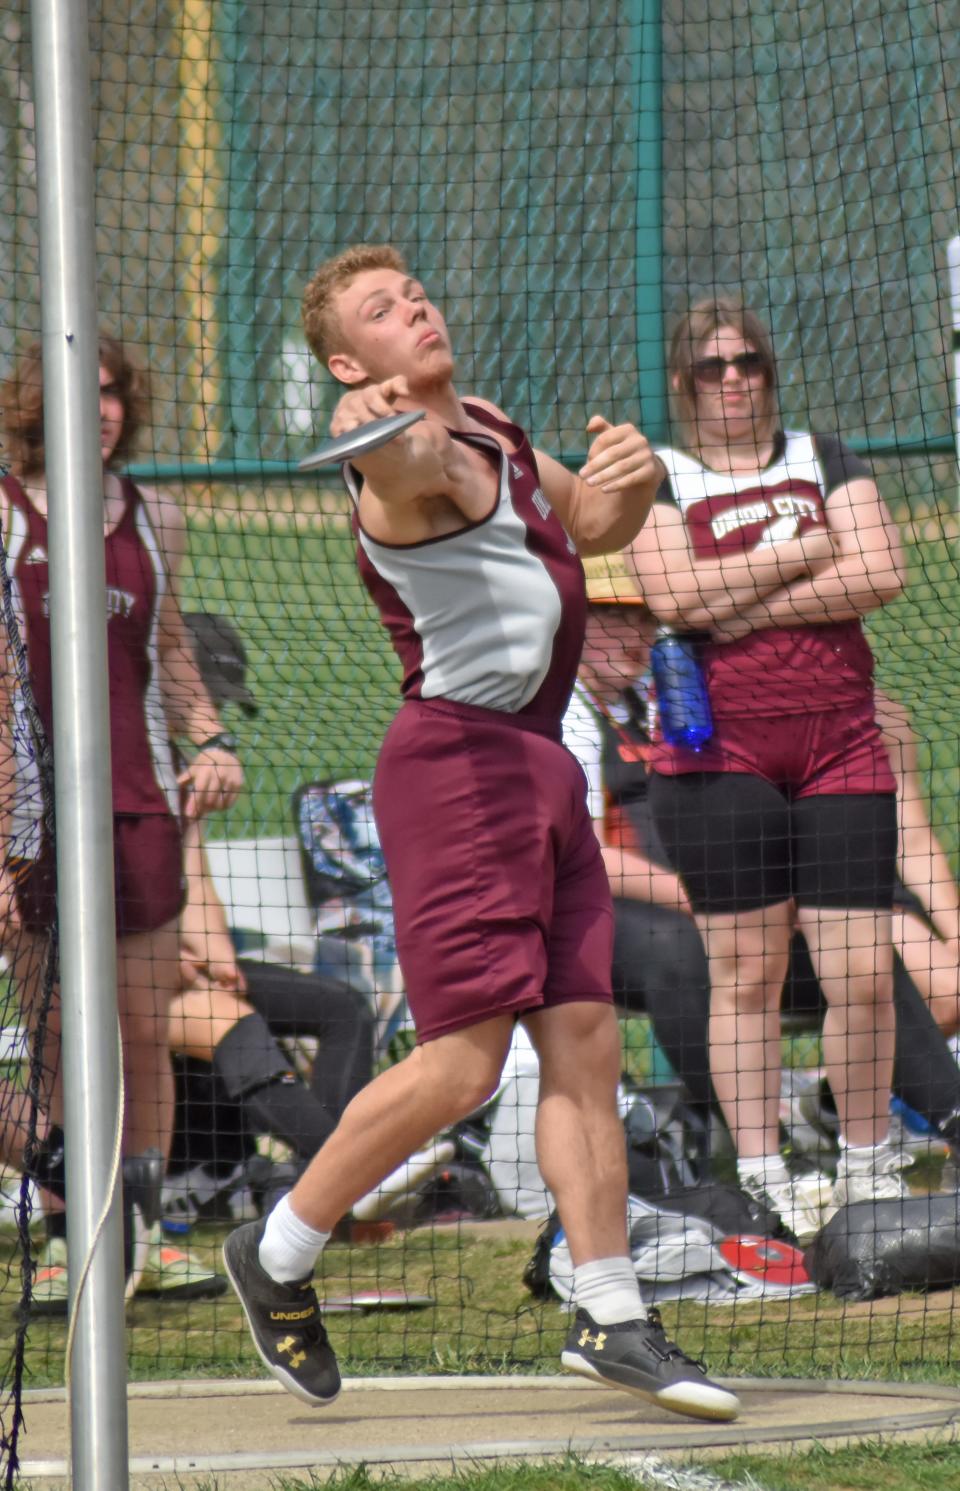 Union City's Logan Cole swept the throwing events at Saturday's Branch County Invite, winning both the shot put and discus